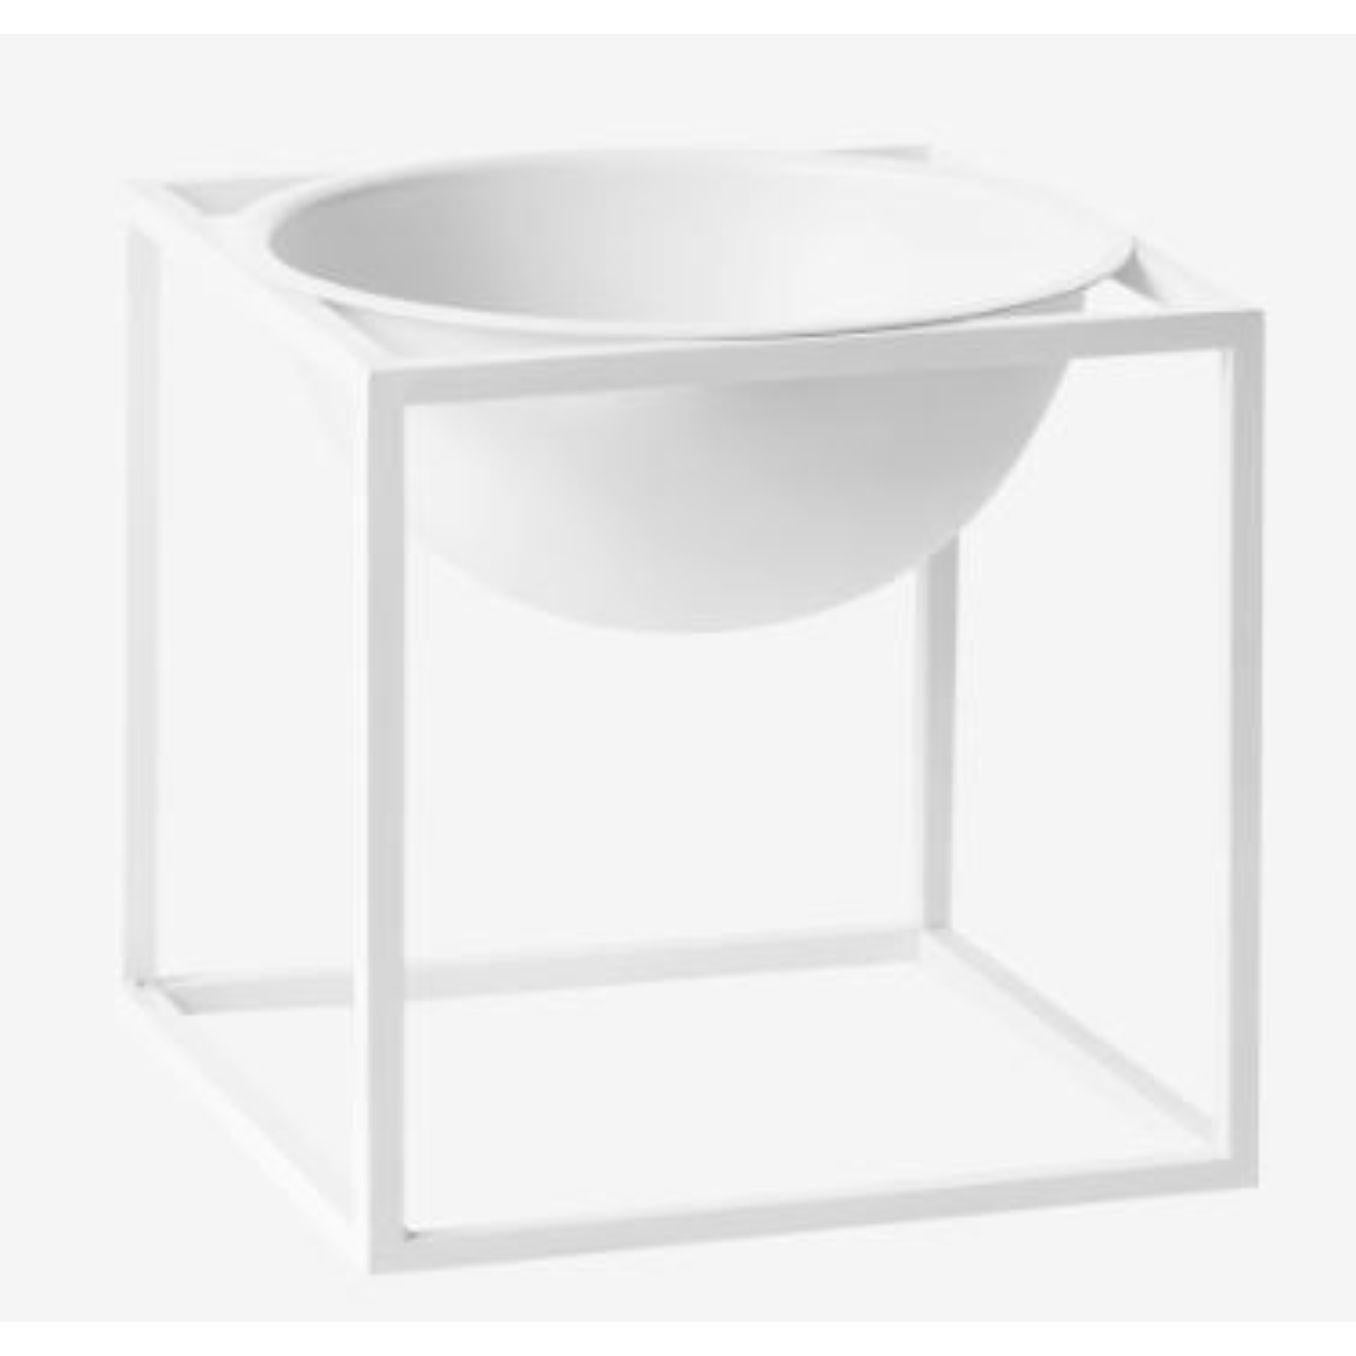 White small Kubus bowl by Lassen
Dimensions: w 14 x w 14 x h 14 cm 
Materials: Metal 
Weight: 1.35 Kg

Kubus bowl is based on original sketches by Mogens Lassen, and contains elements from Bauhaus, which Mogens Lassen took inspiration from.